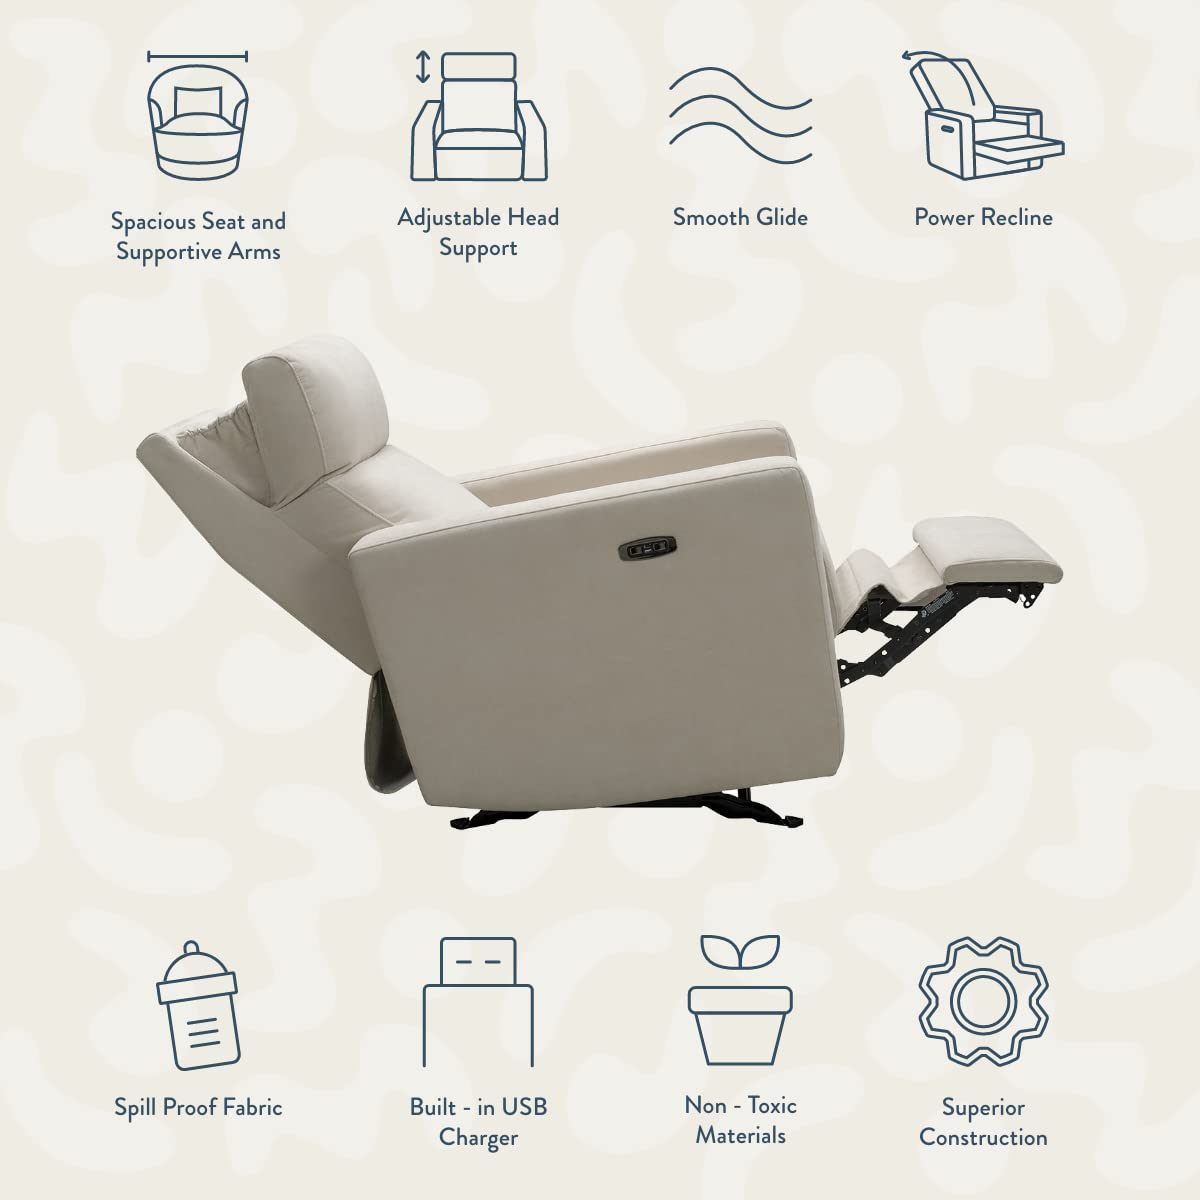 Nurture& The Glider Premium Power Recliner Nursery Glider Chair with Adjustable Head Support | Designed with a Thoughtful Combination of Function and Comfort | Built-in USB Charger (Ivory)